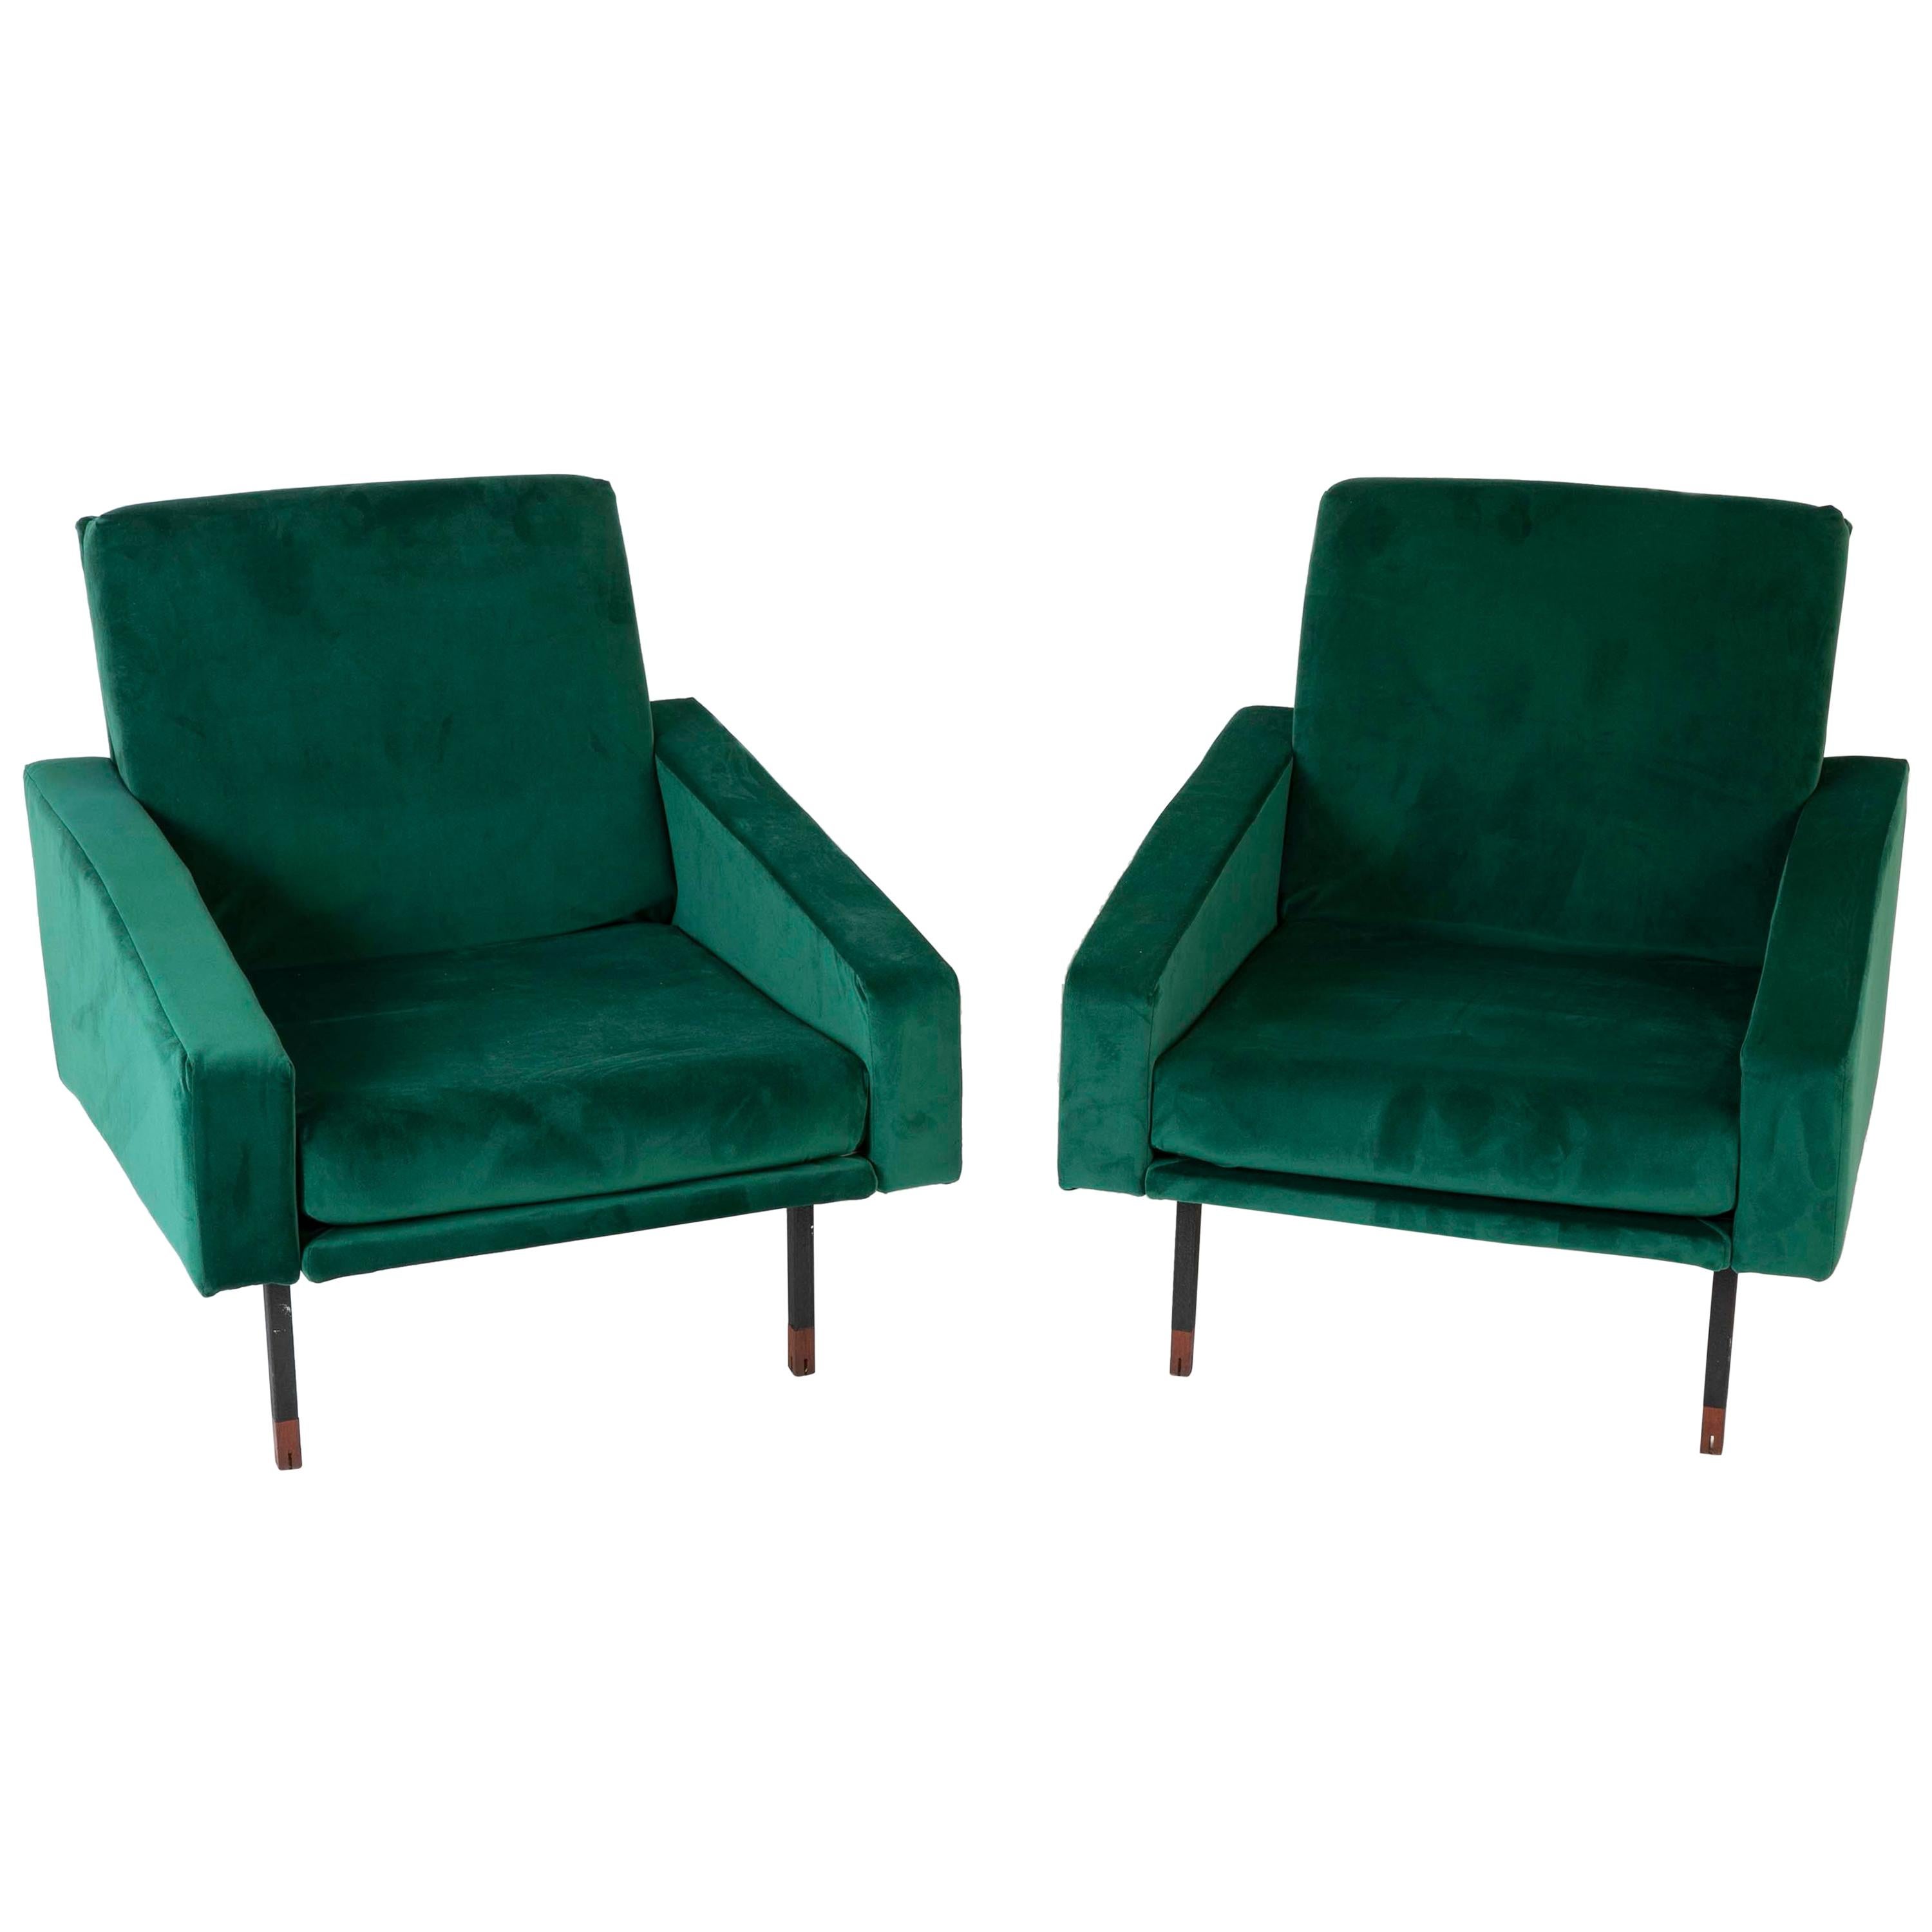 Pair of Upholstered Italian Midcentury Armchairs with Walnut Tipped Legs